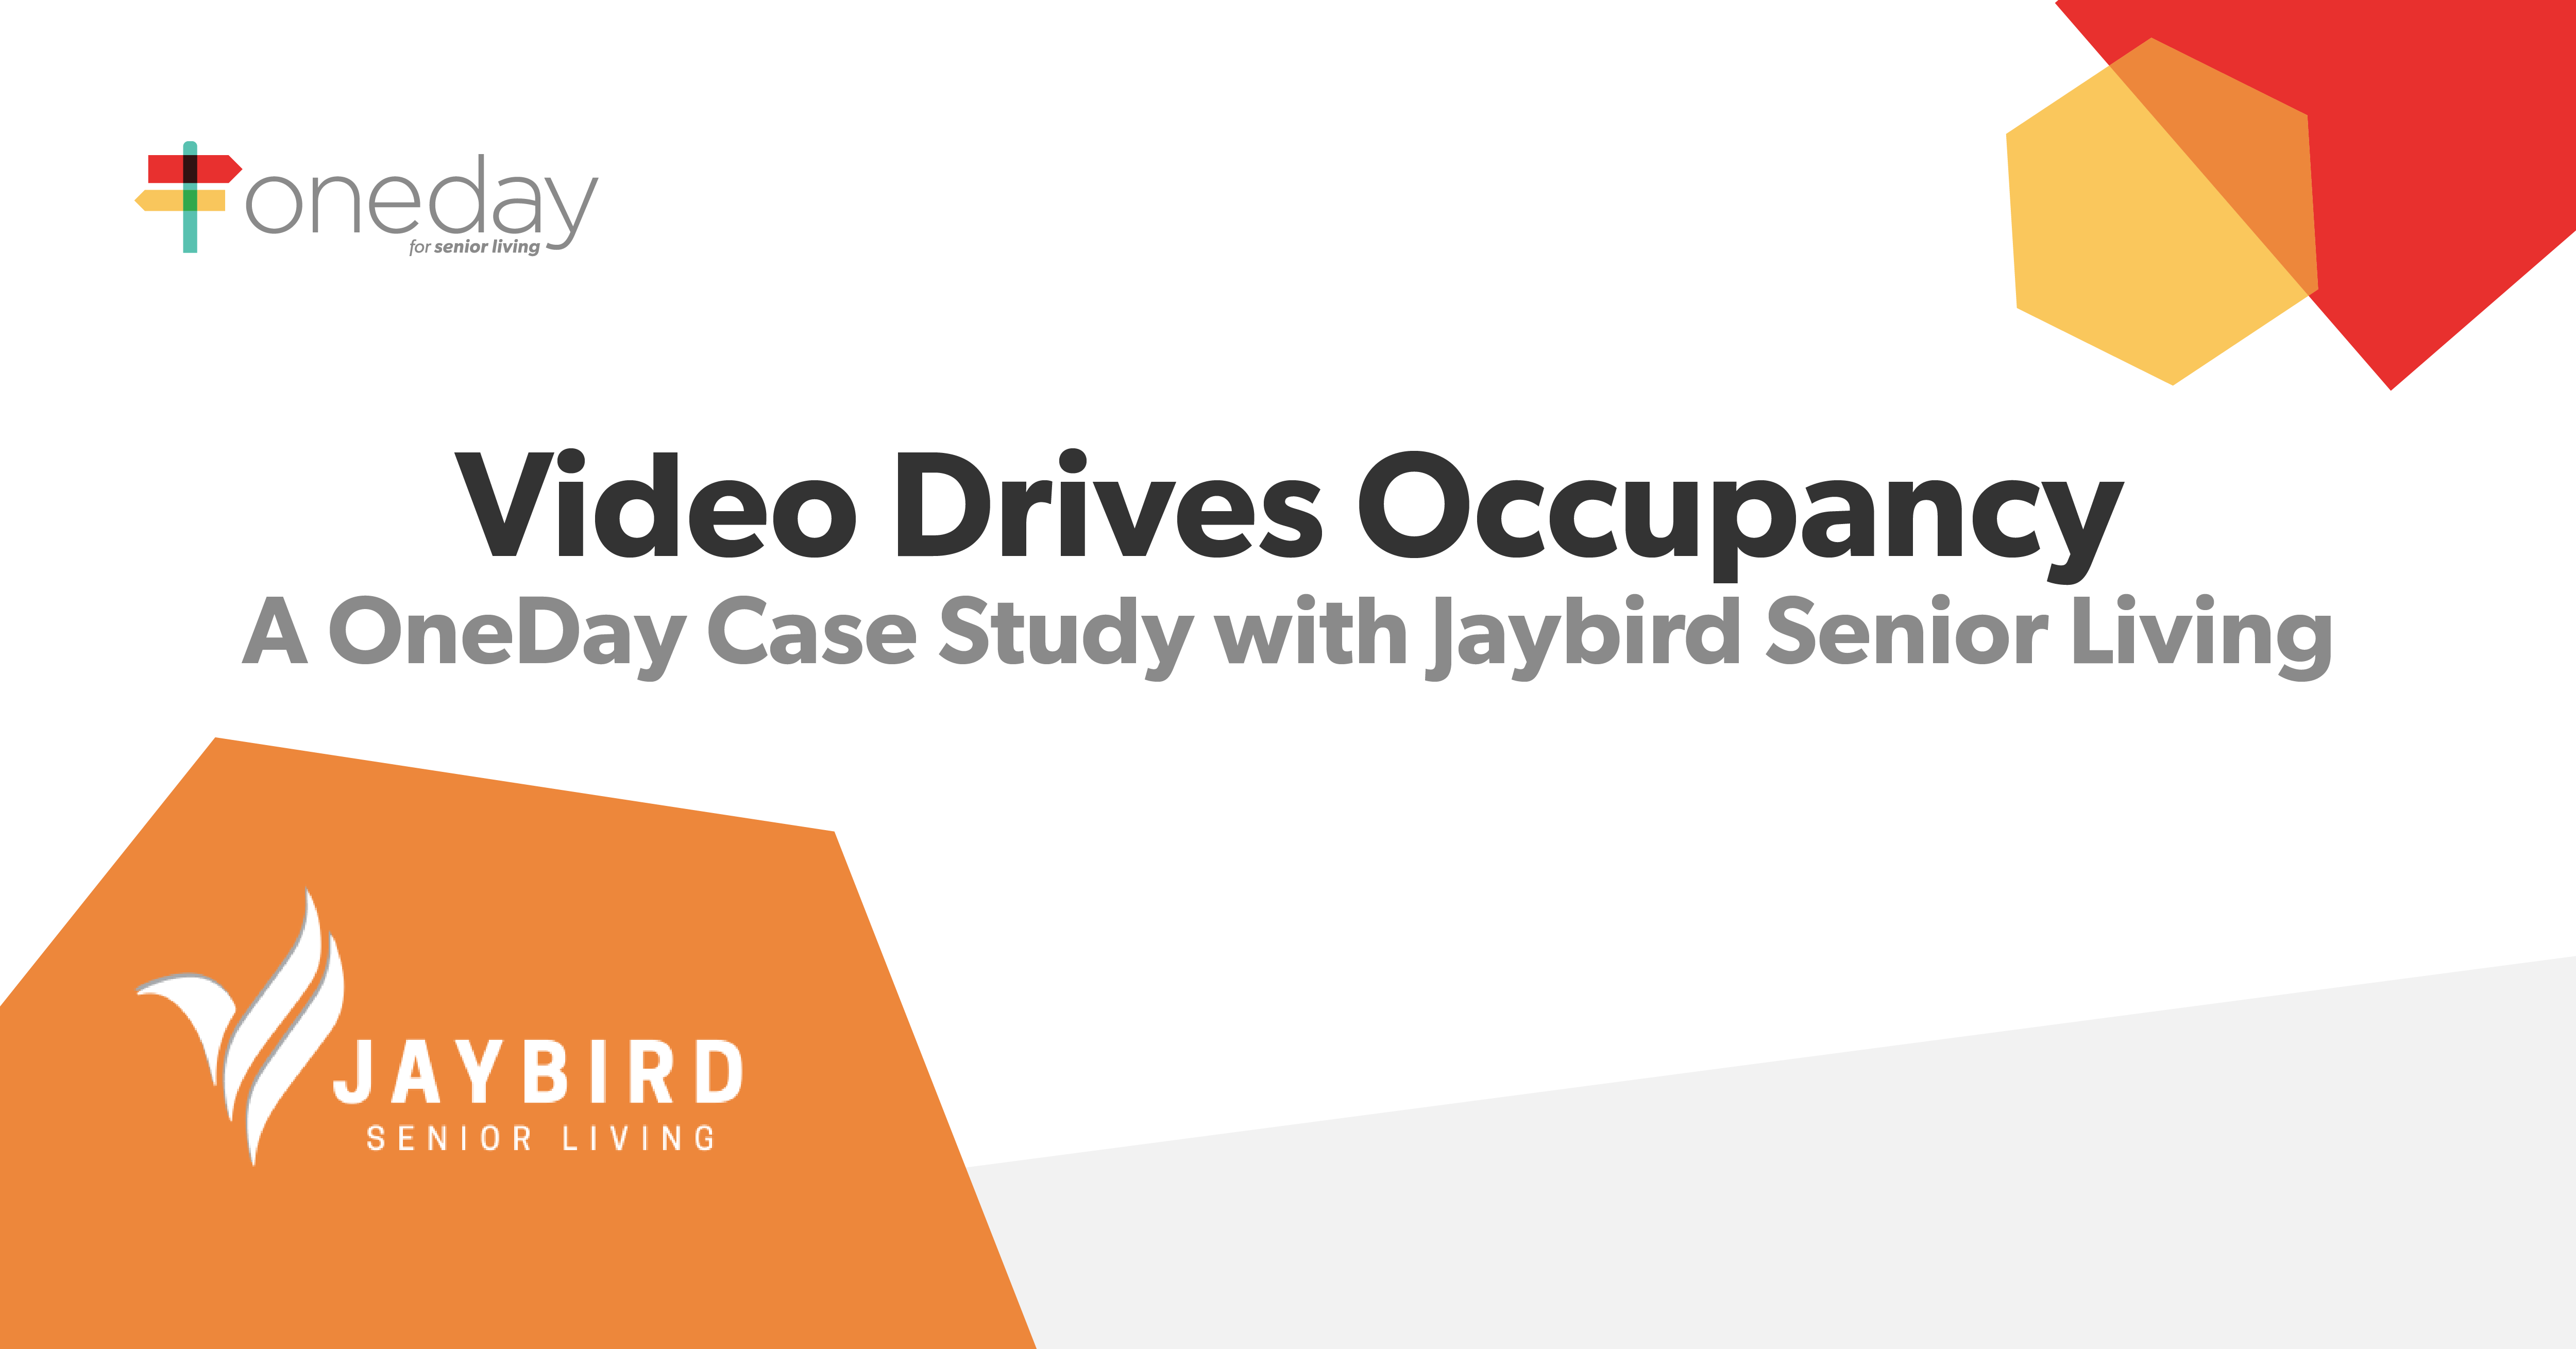 Jaybird utilized video to give potential residents a personalized, meaningful experience throughout the sales process, making an incredible impact on their bottom line